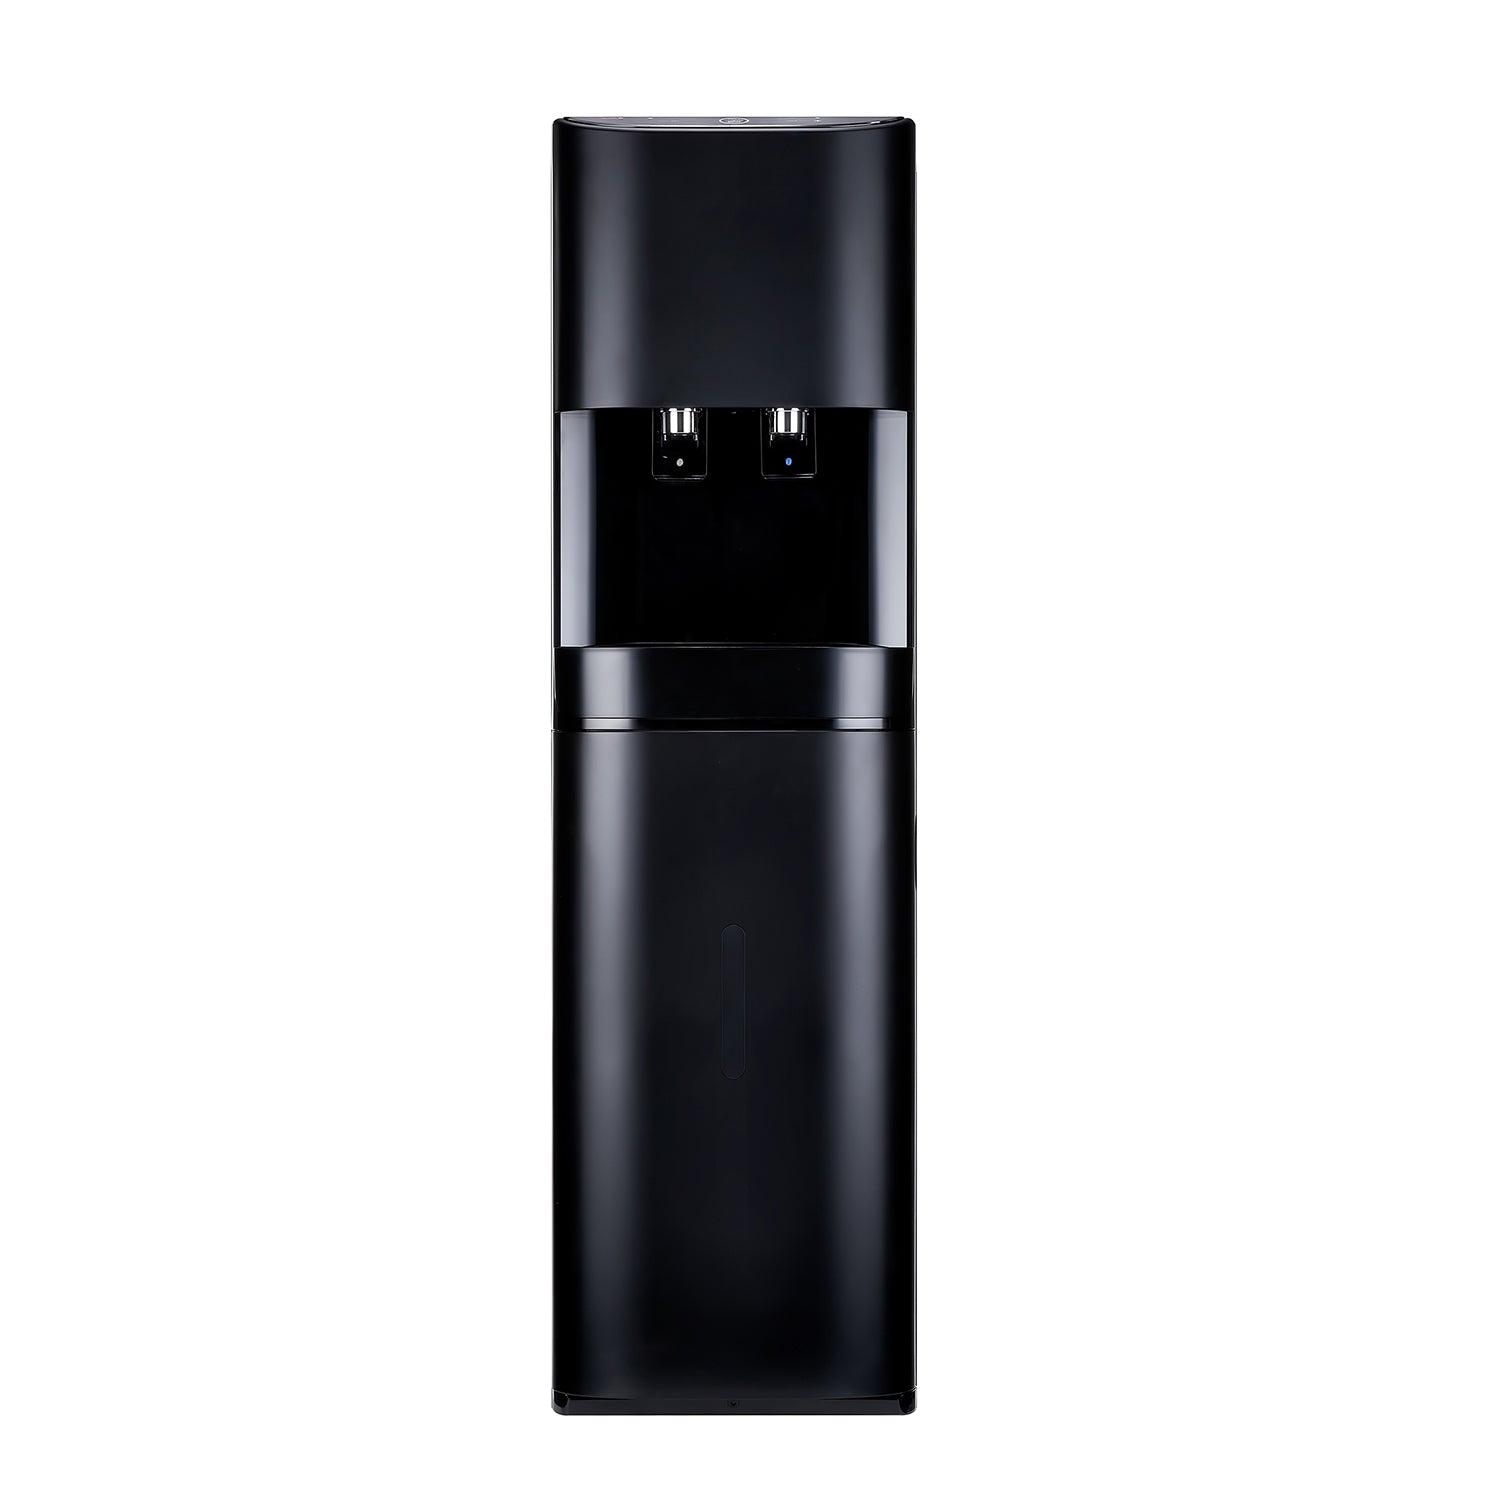 Black Freestanding Water Filtration System for hire